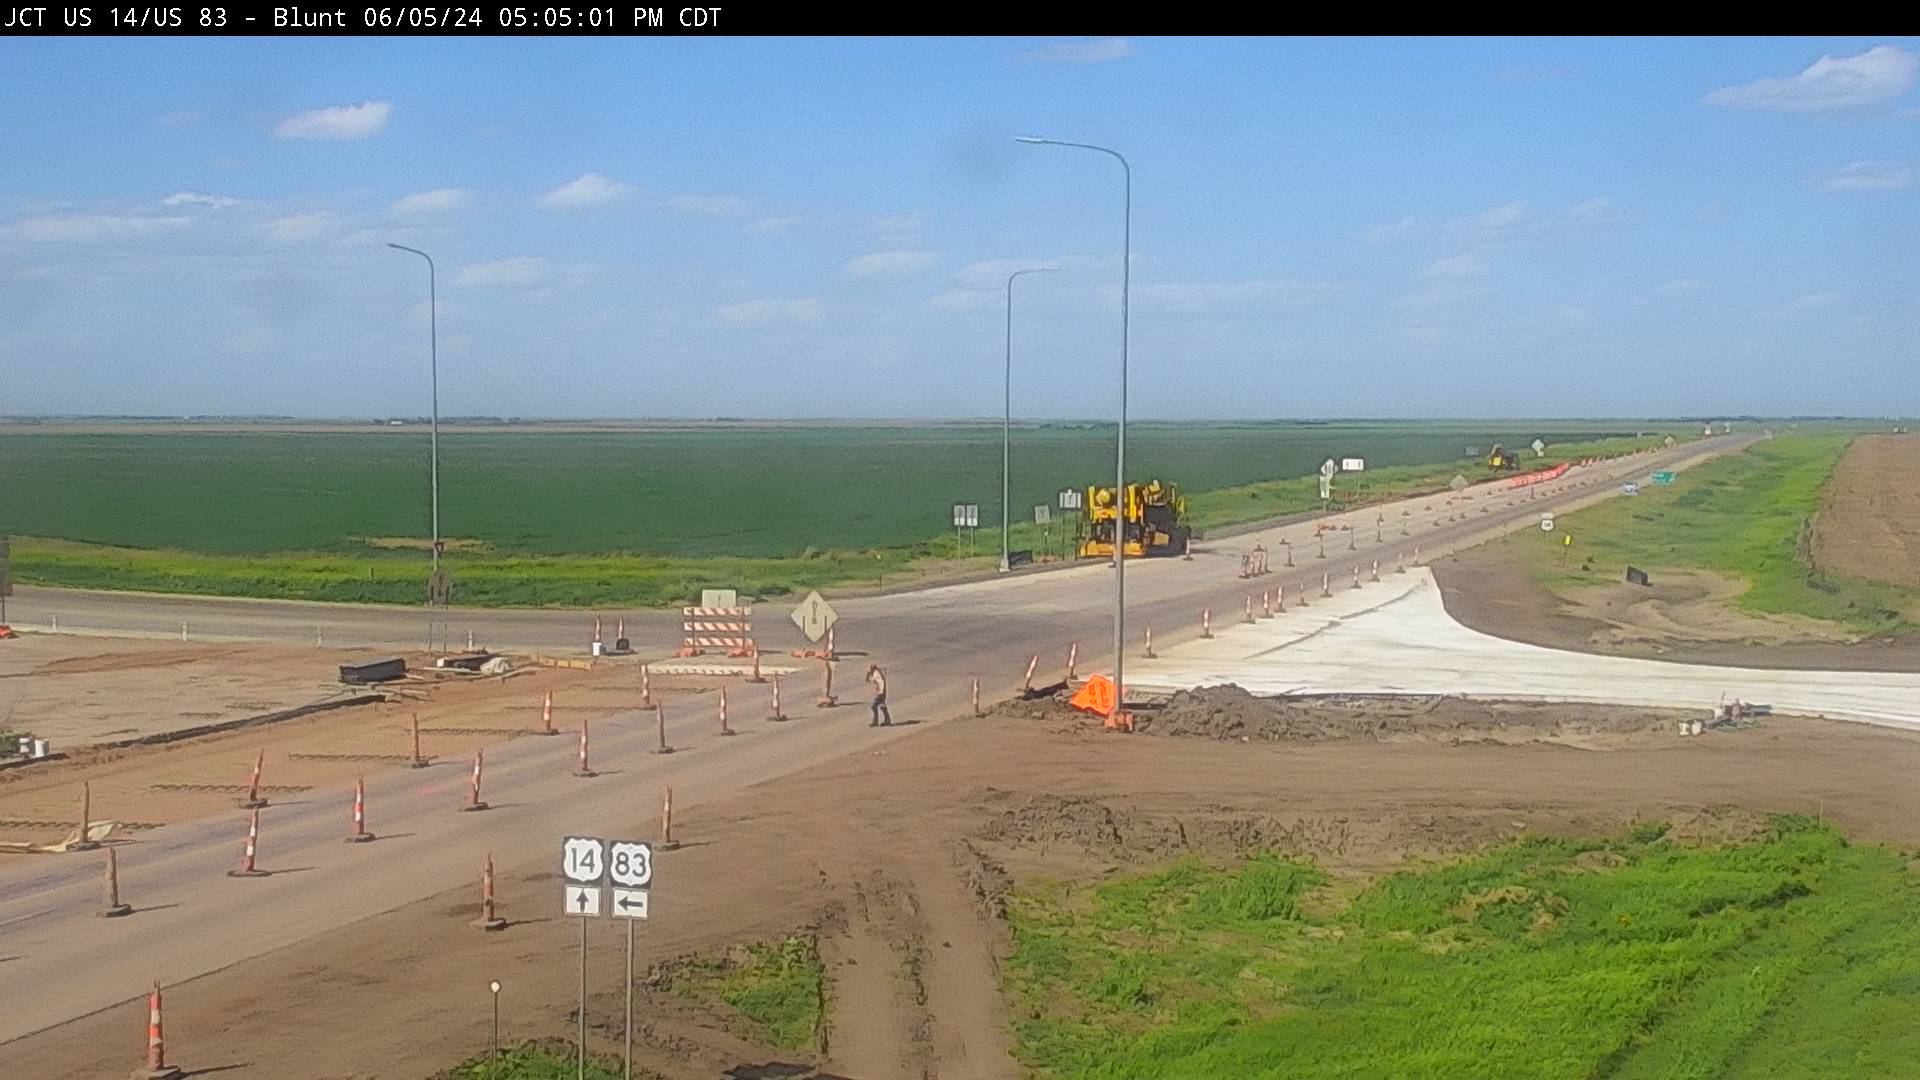 Traffic Cam 4 miles west of town at US-14 & US-83 - East Player